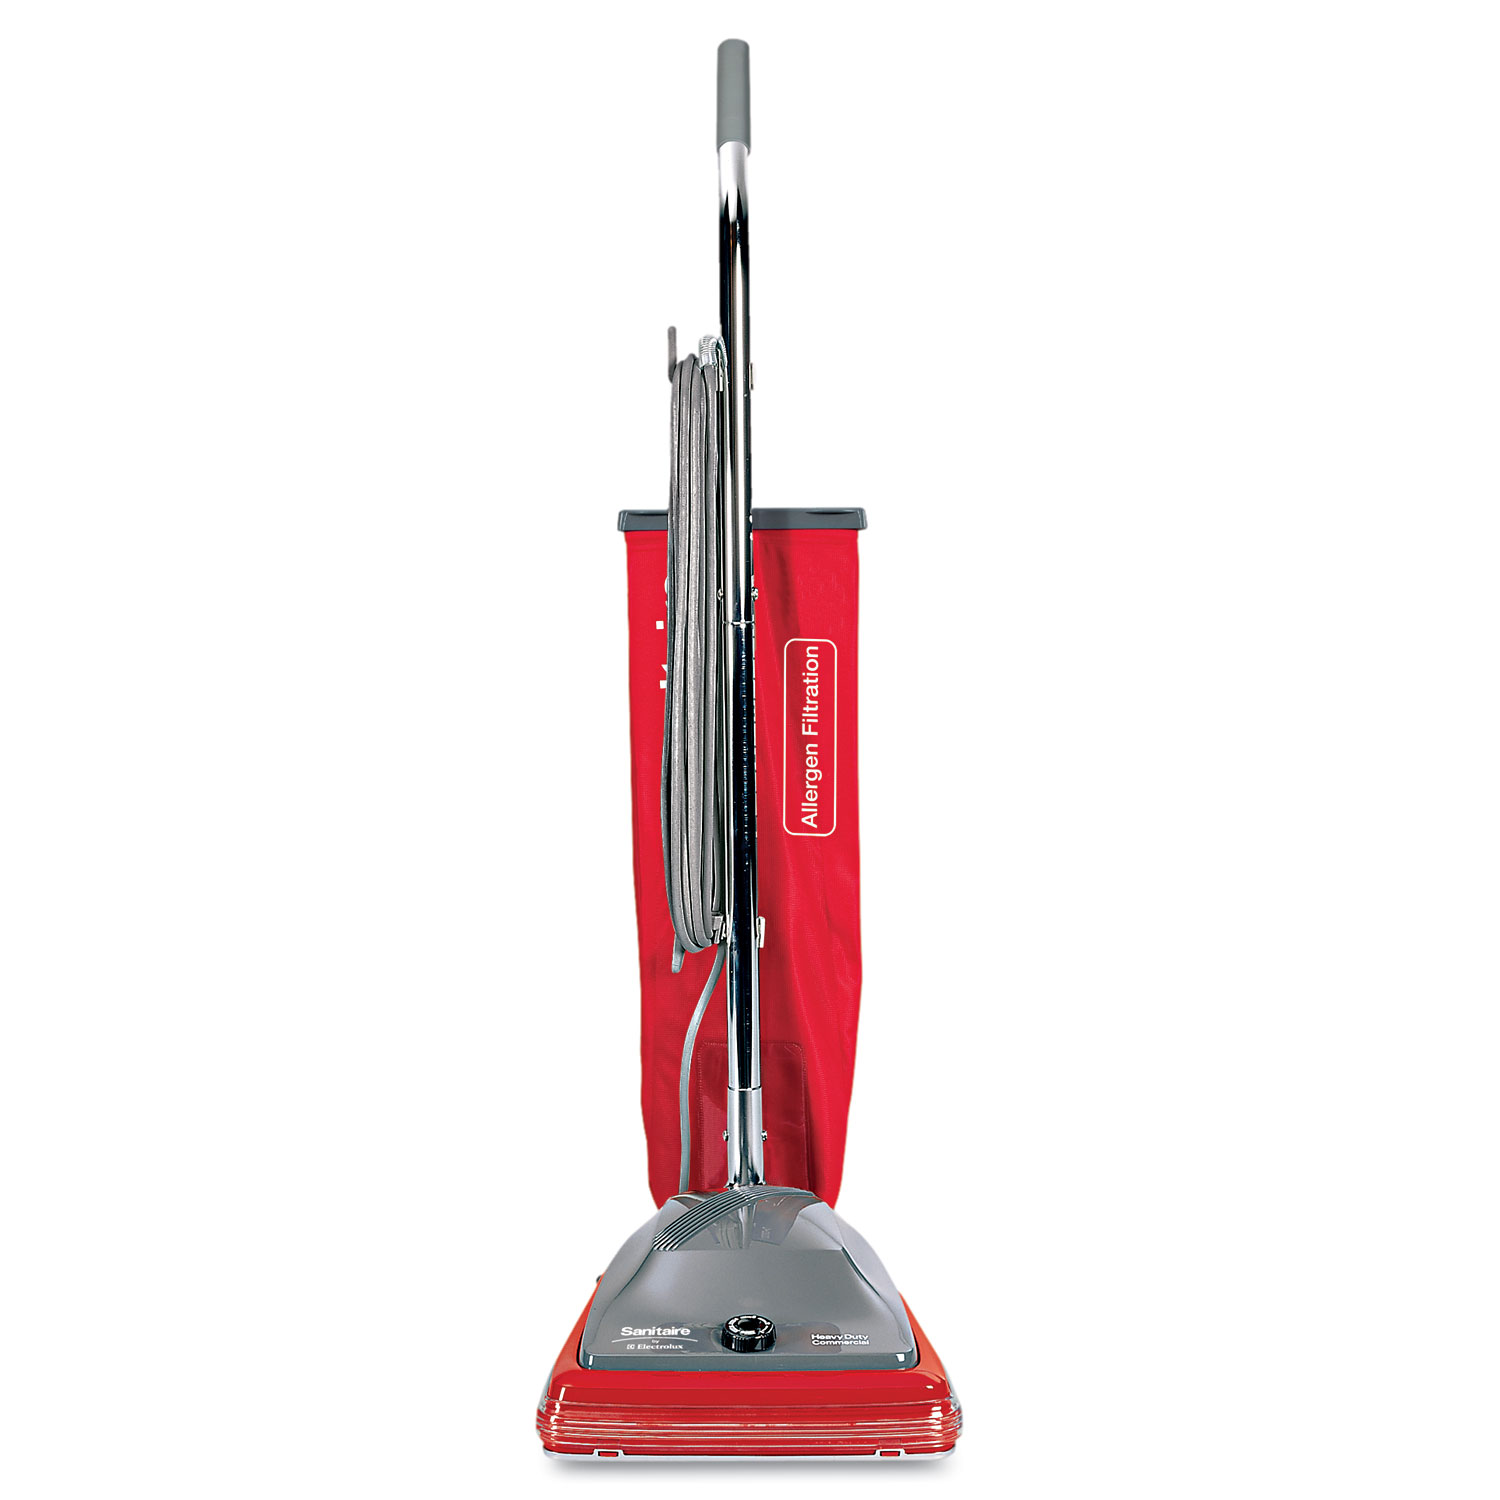 TRADITION Upright Bagged Vacuum, 5 Amp, 19.8 lb, Red/Gray